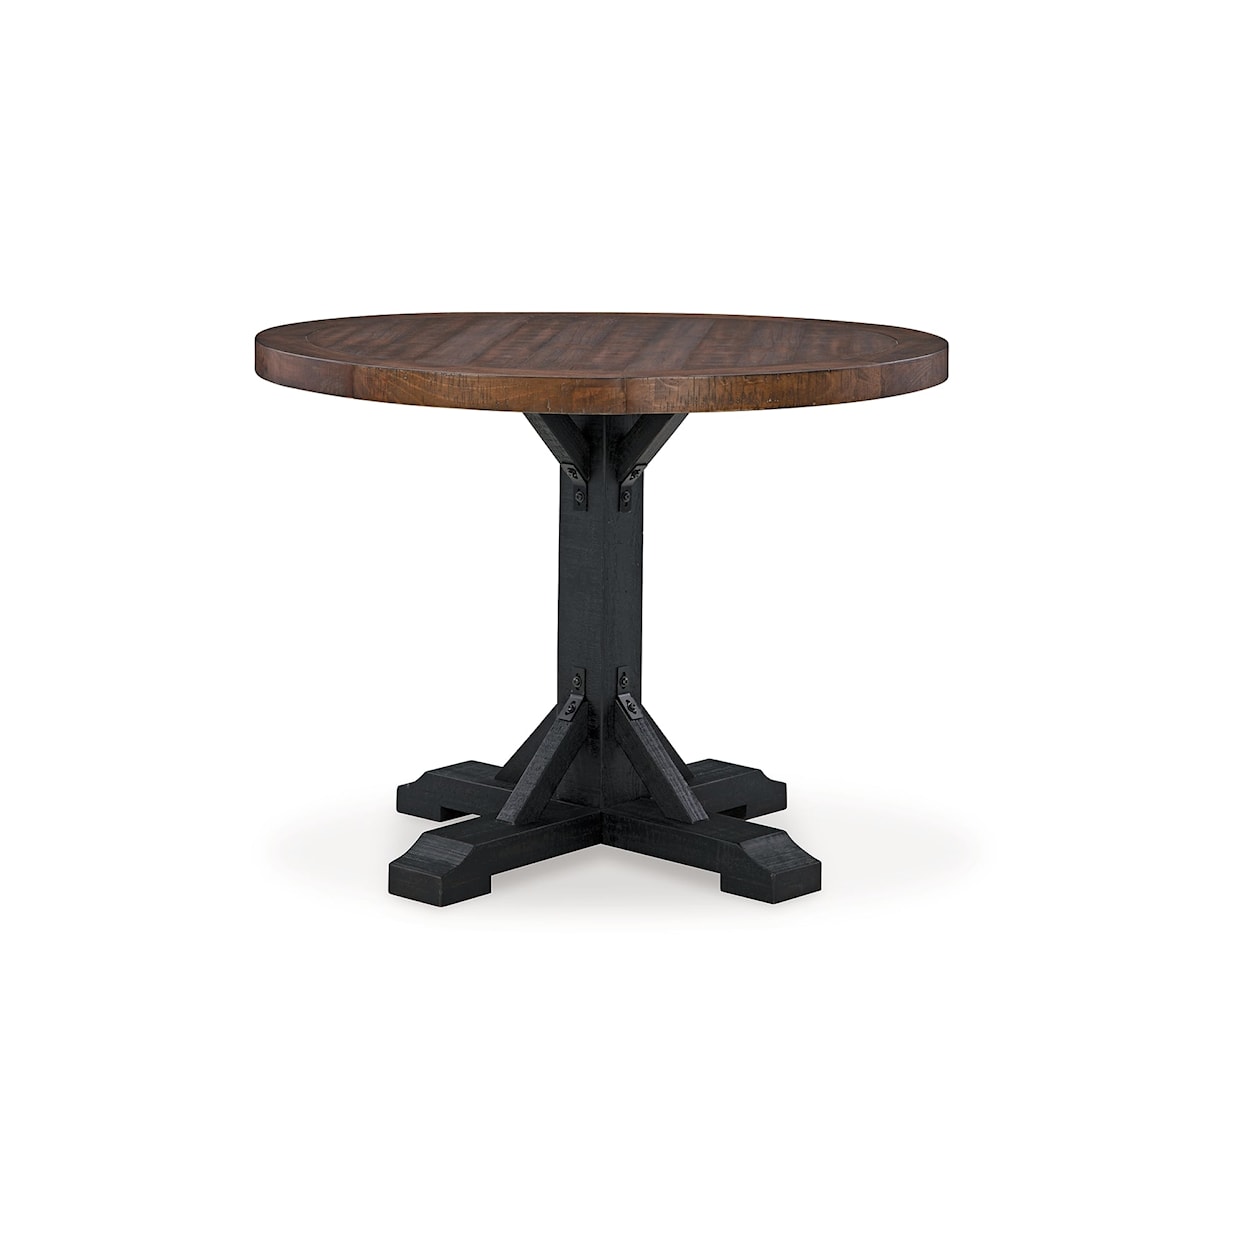 Michael Alan Select Valebeck Dining Table